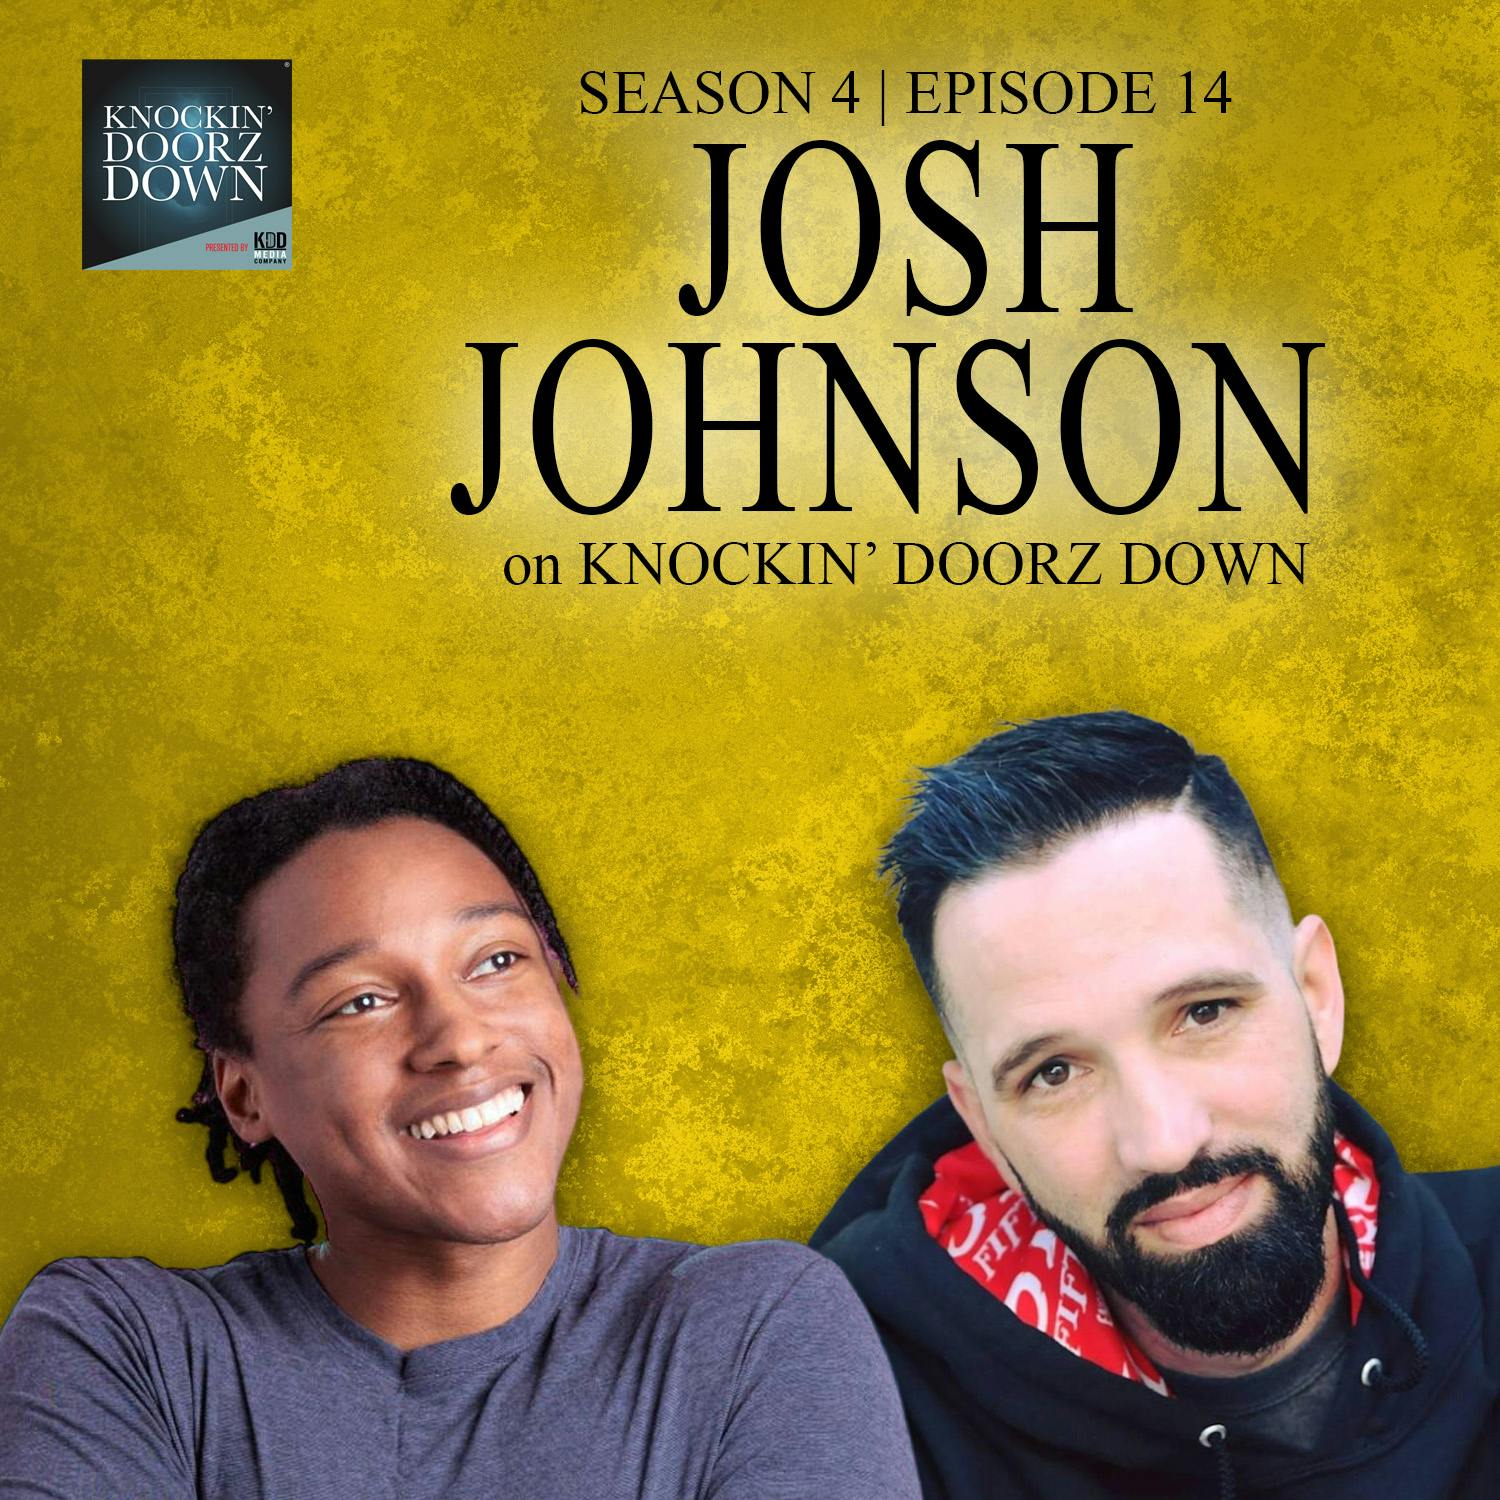 Josh Johnson | Stand Up Comedian ”Up Here Killing Myself” Comedy Special, Personal Growth, Self Improvement